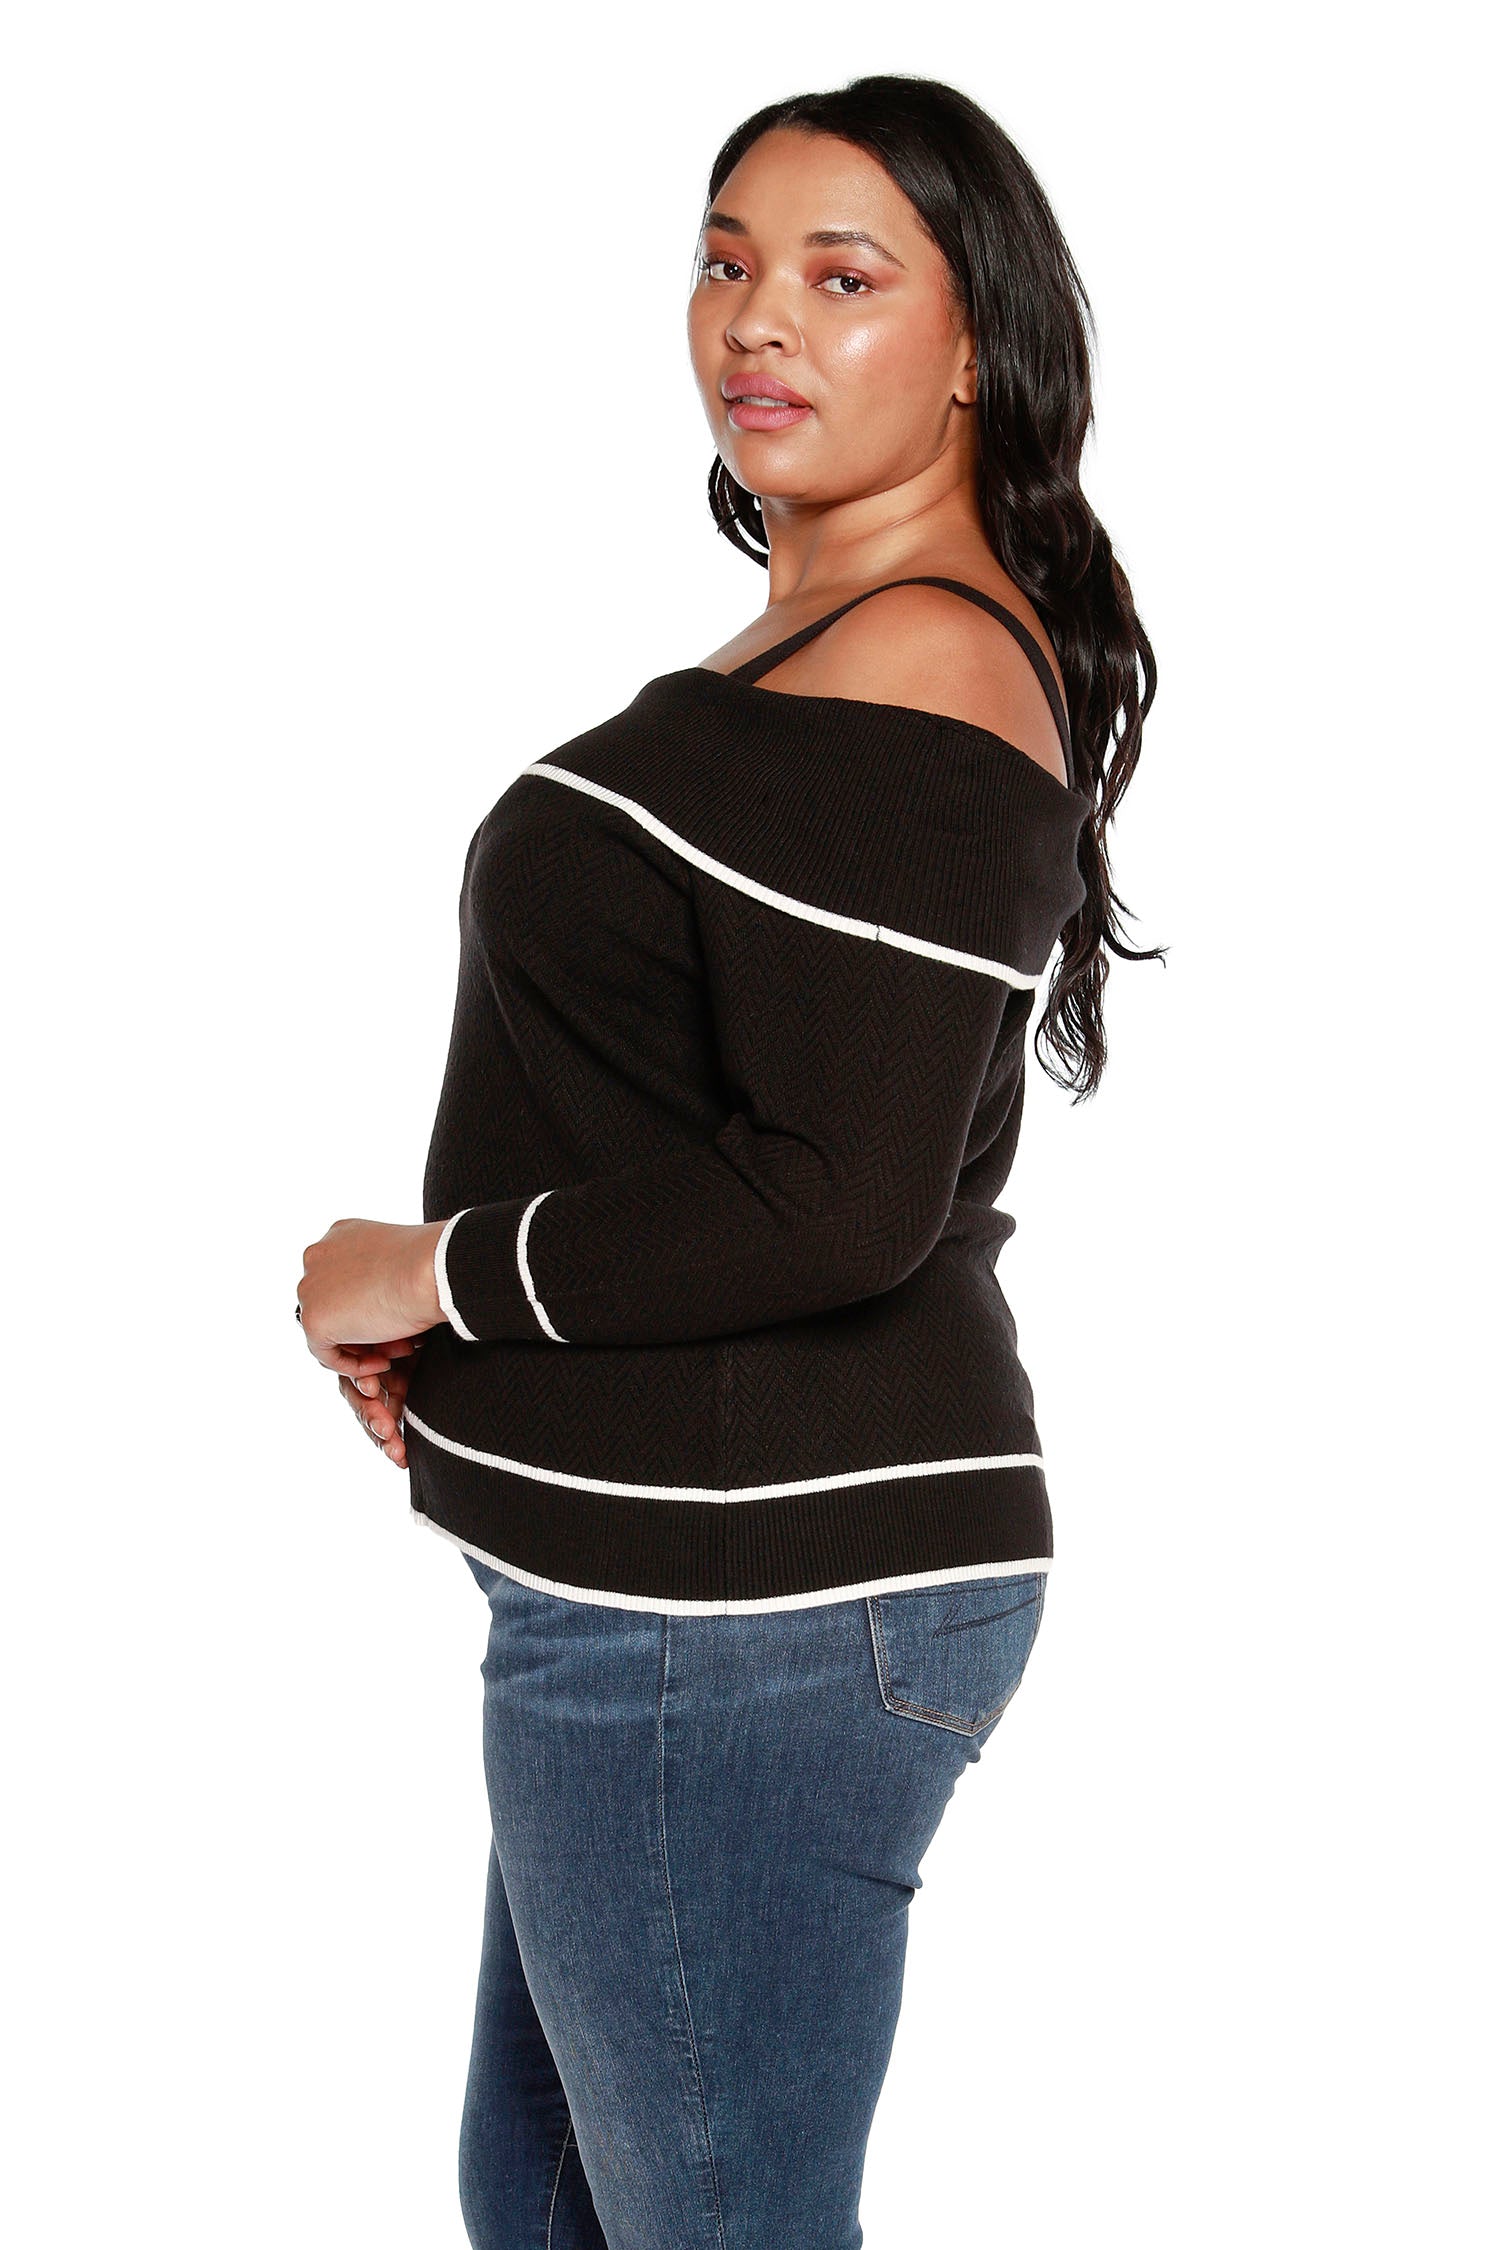 Women’s Slouchy Off the Shoulder Sweater with Fold Over Yoke | Curvy